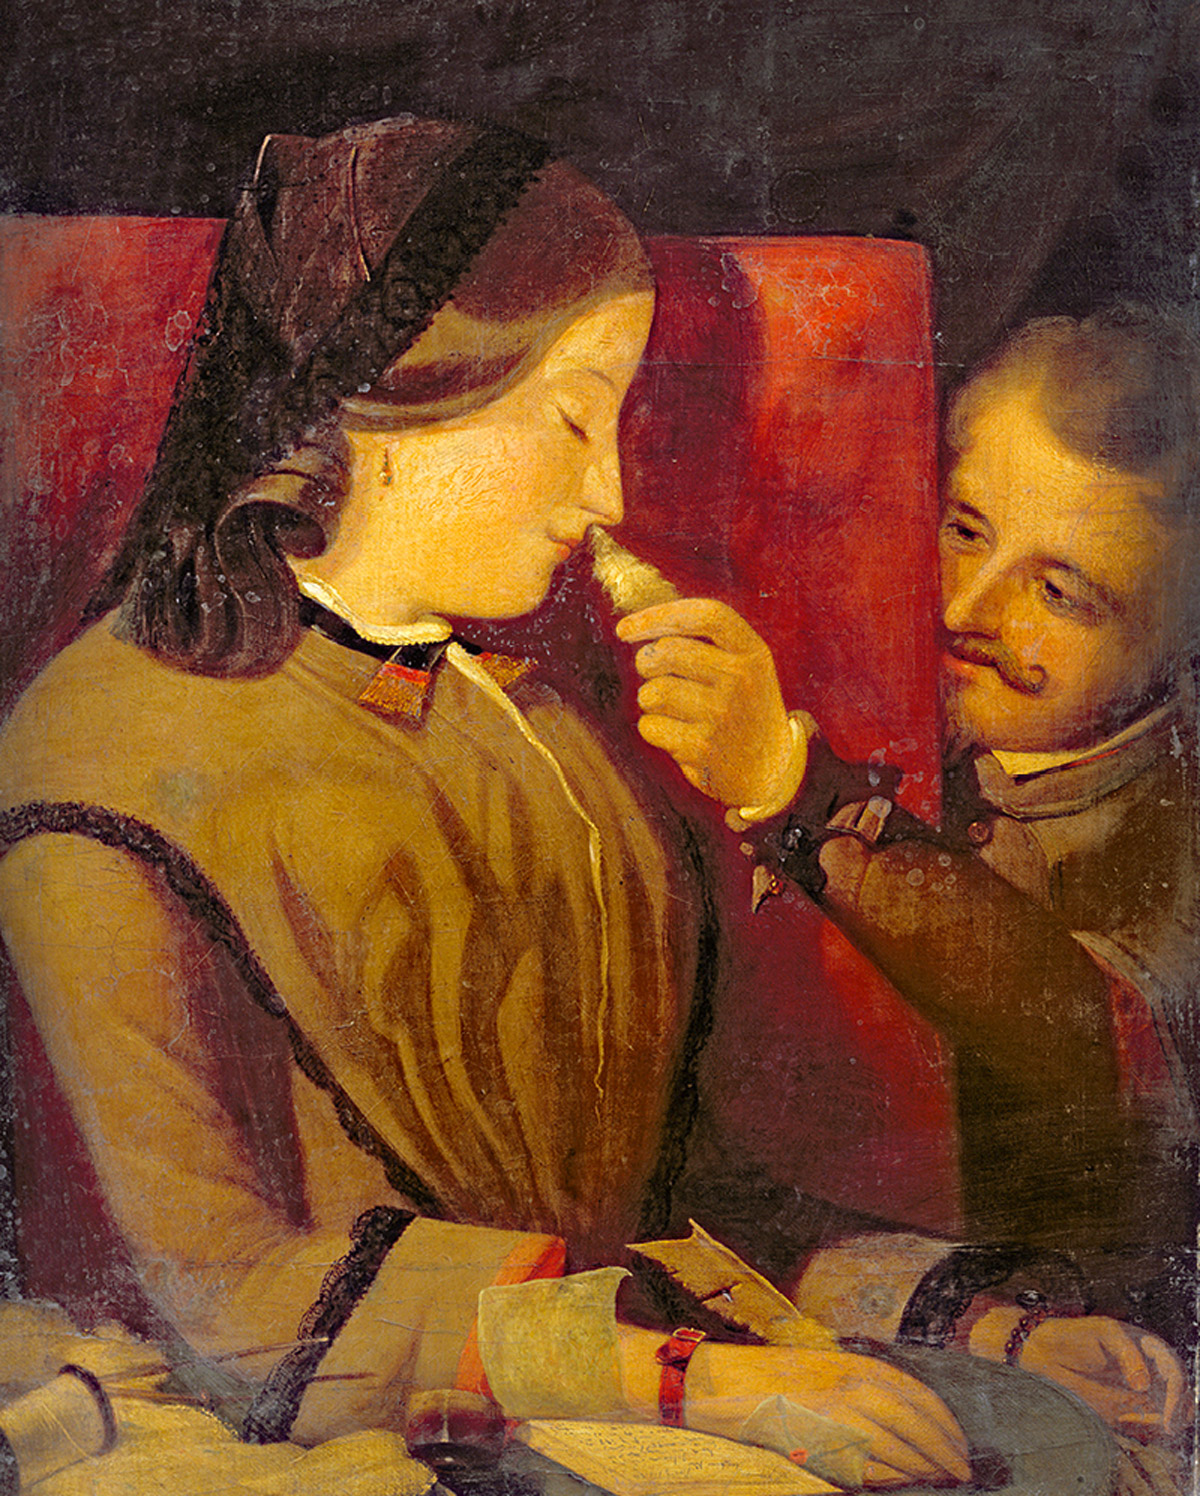 Thomas Wade, Man Tickling a Woman’s Nose with a Feather, ca. 1860.